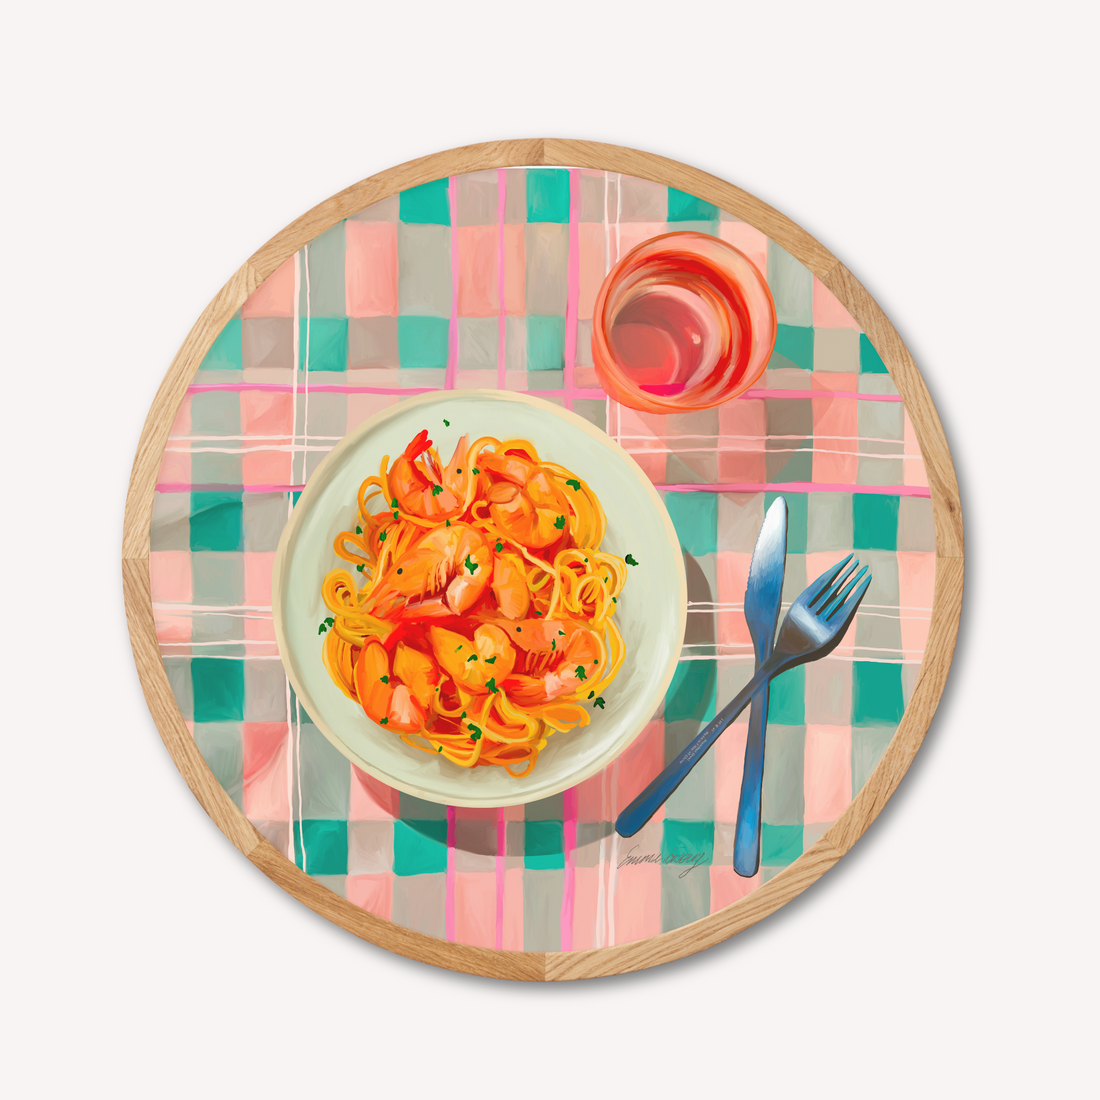 Emma Forsberg - Lunch - Limited ed. (Round)